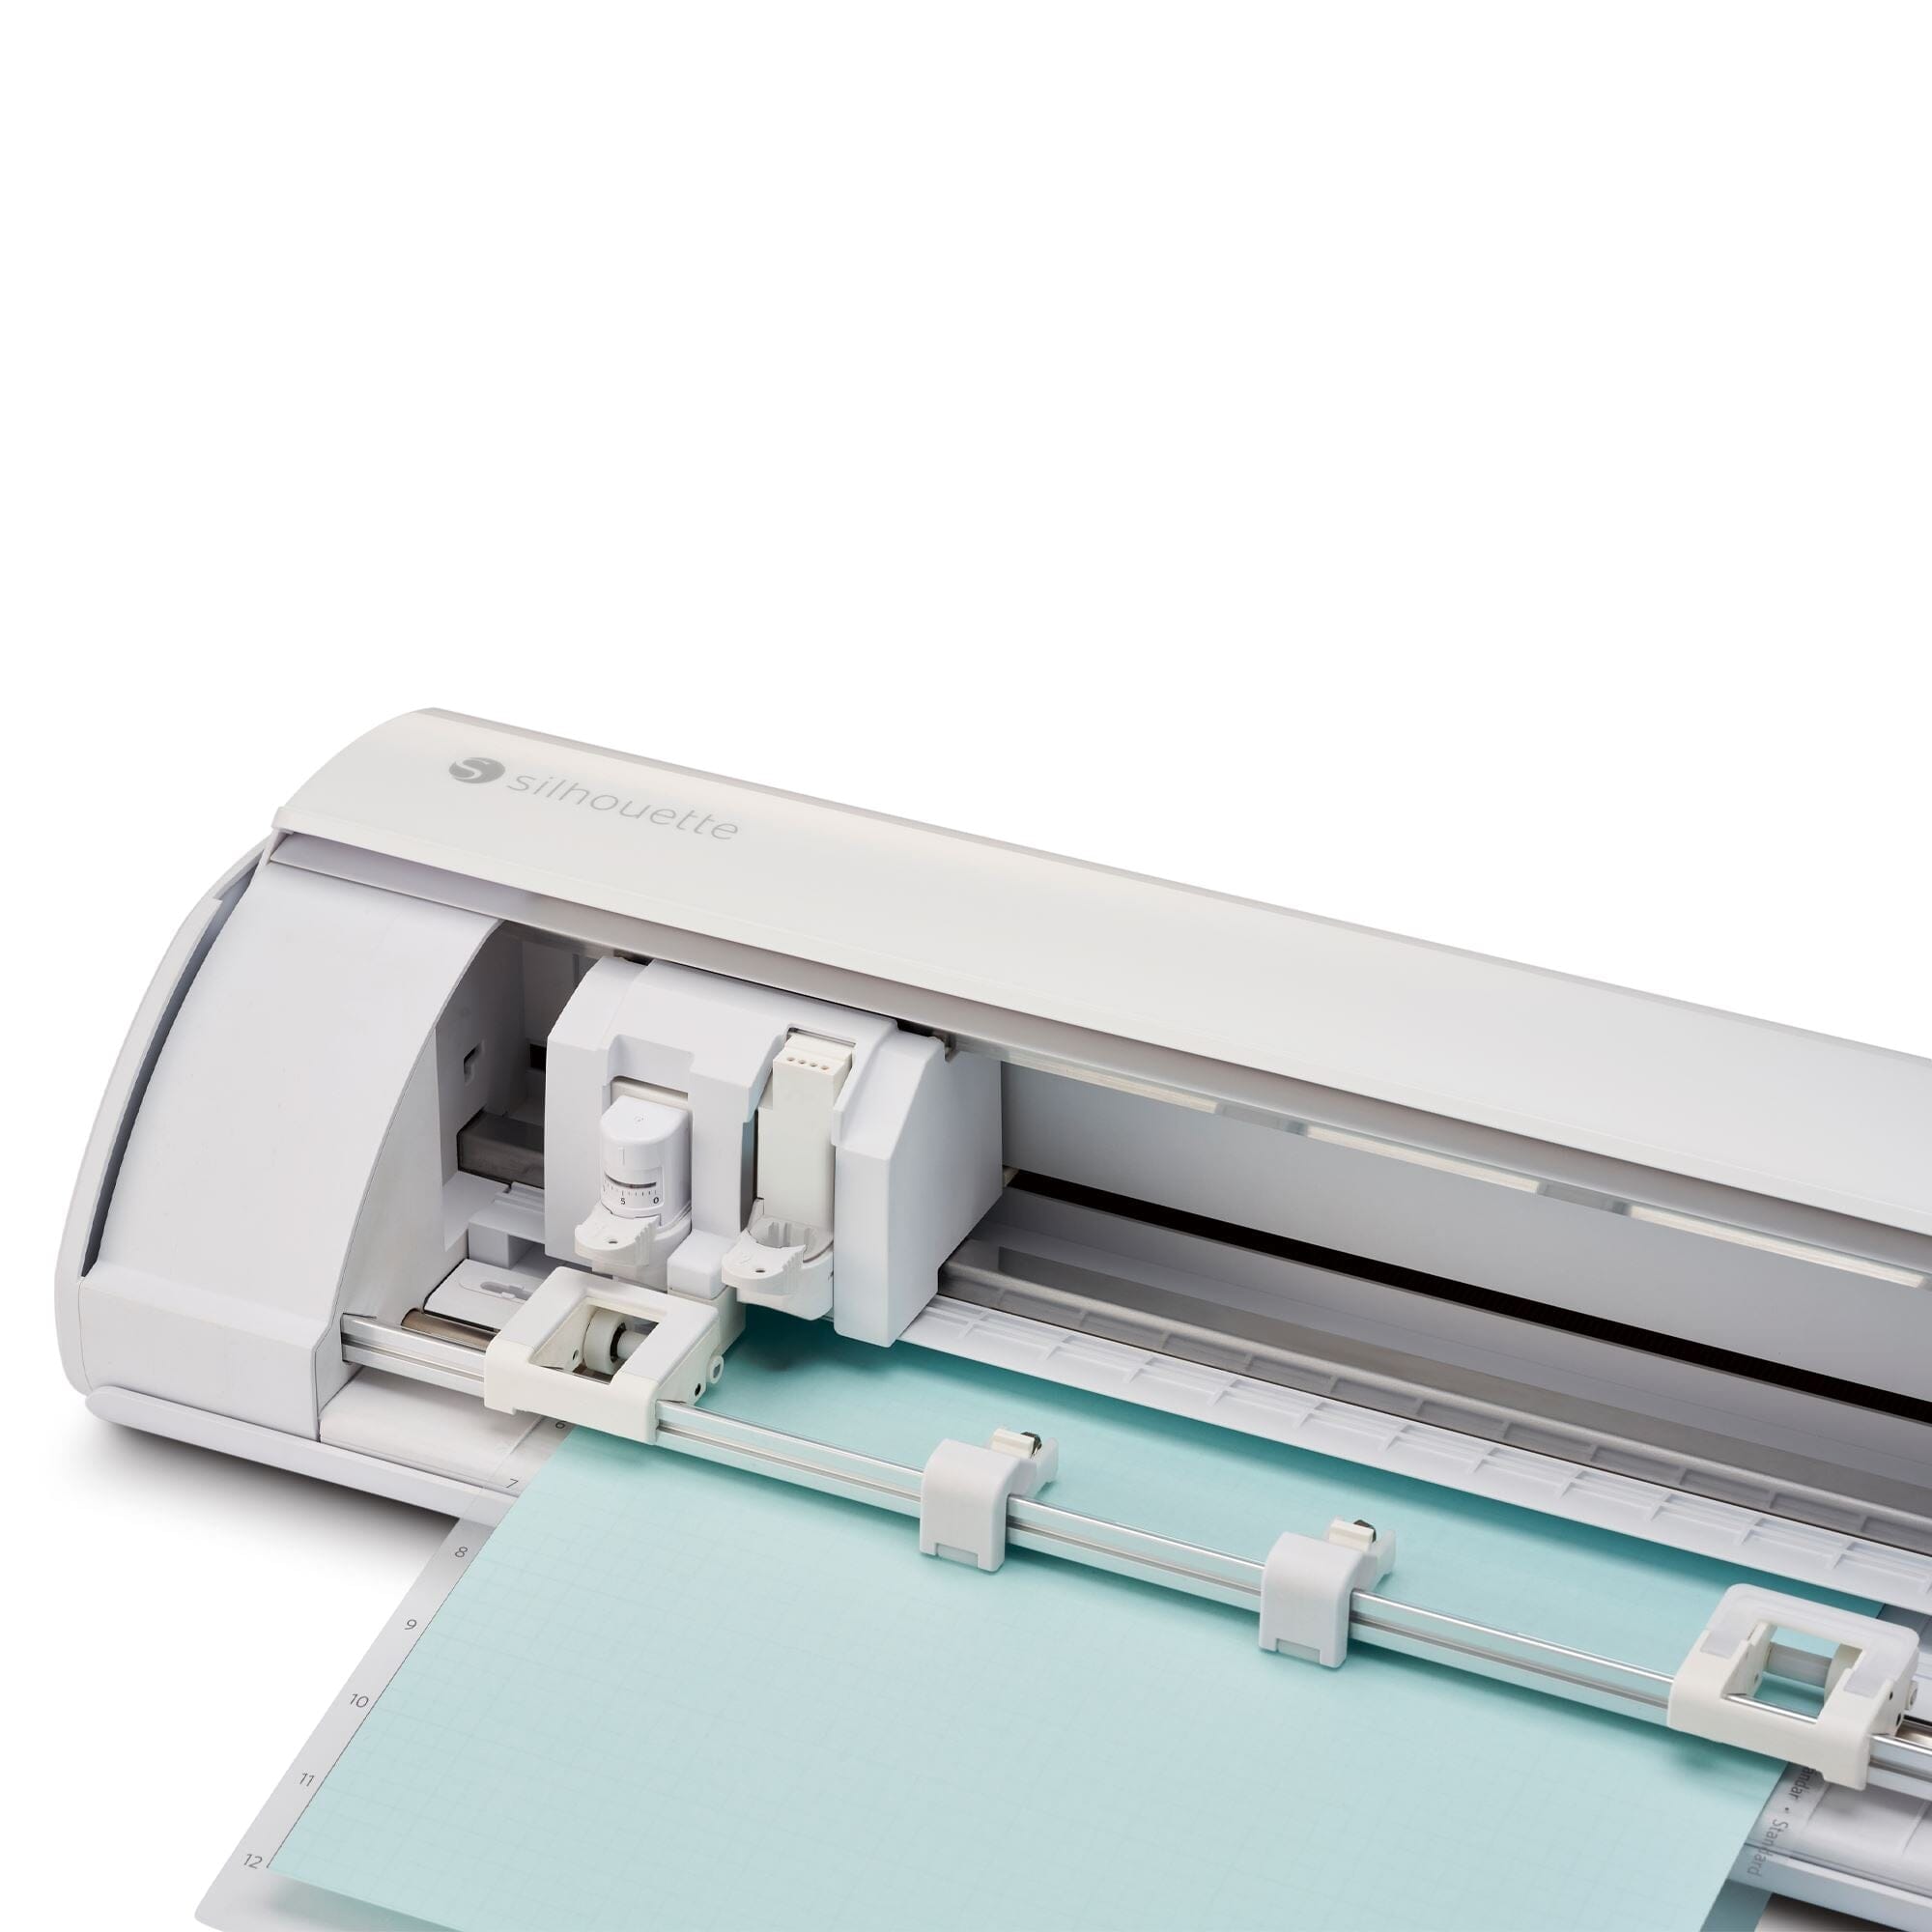 Silhouette Cameo 5: The All New Cutter Is Here! 